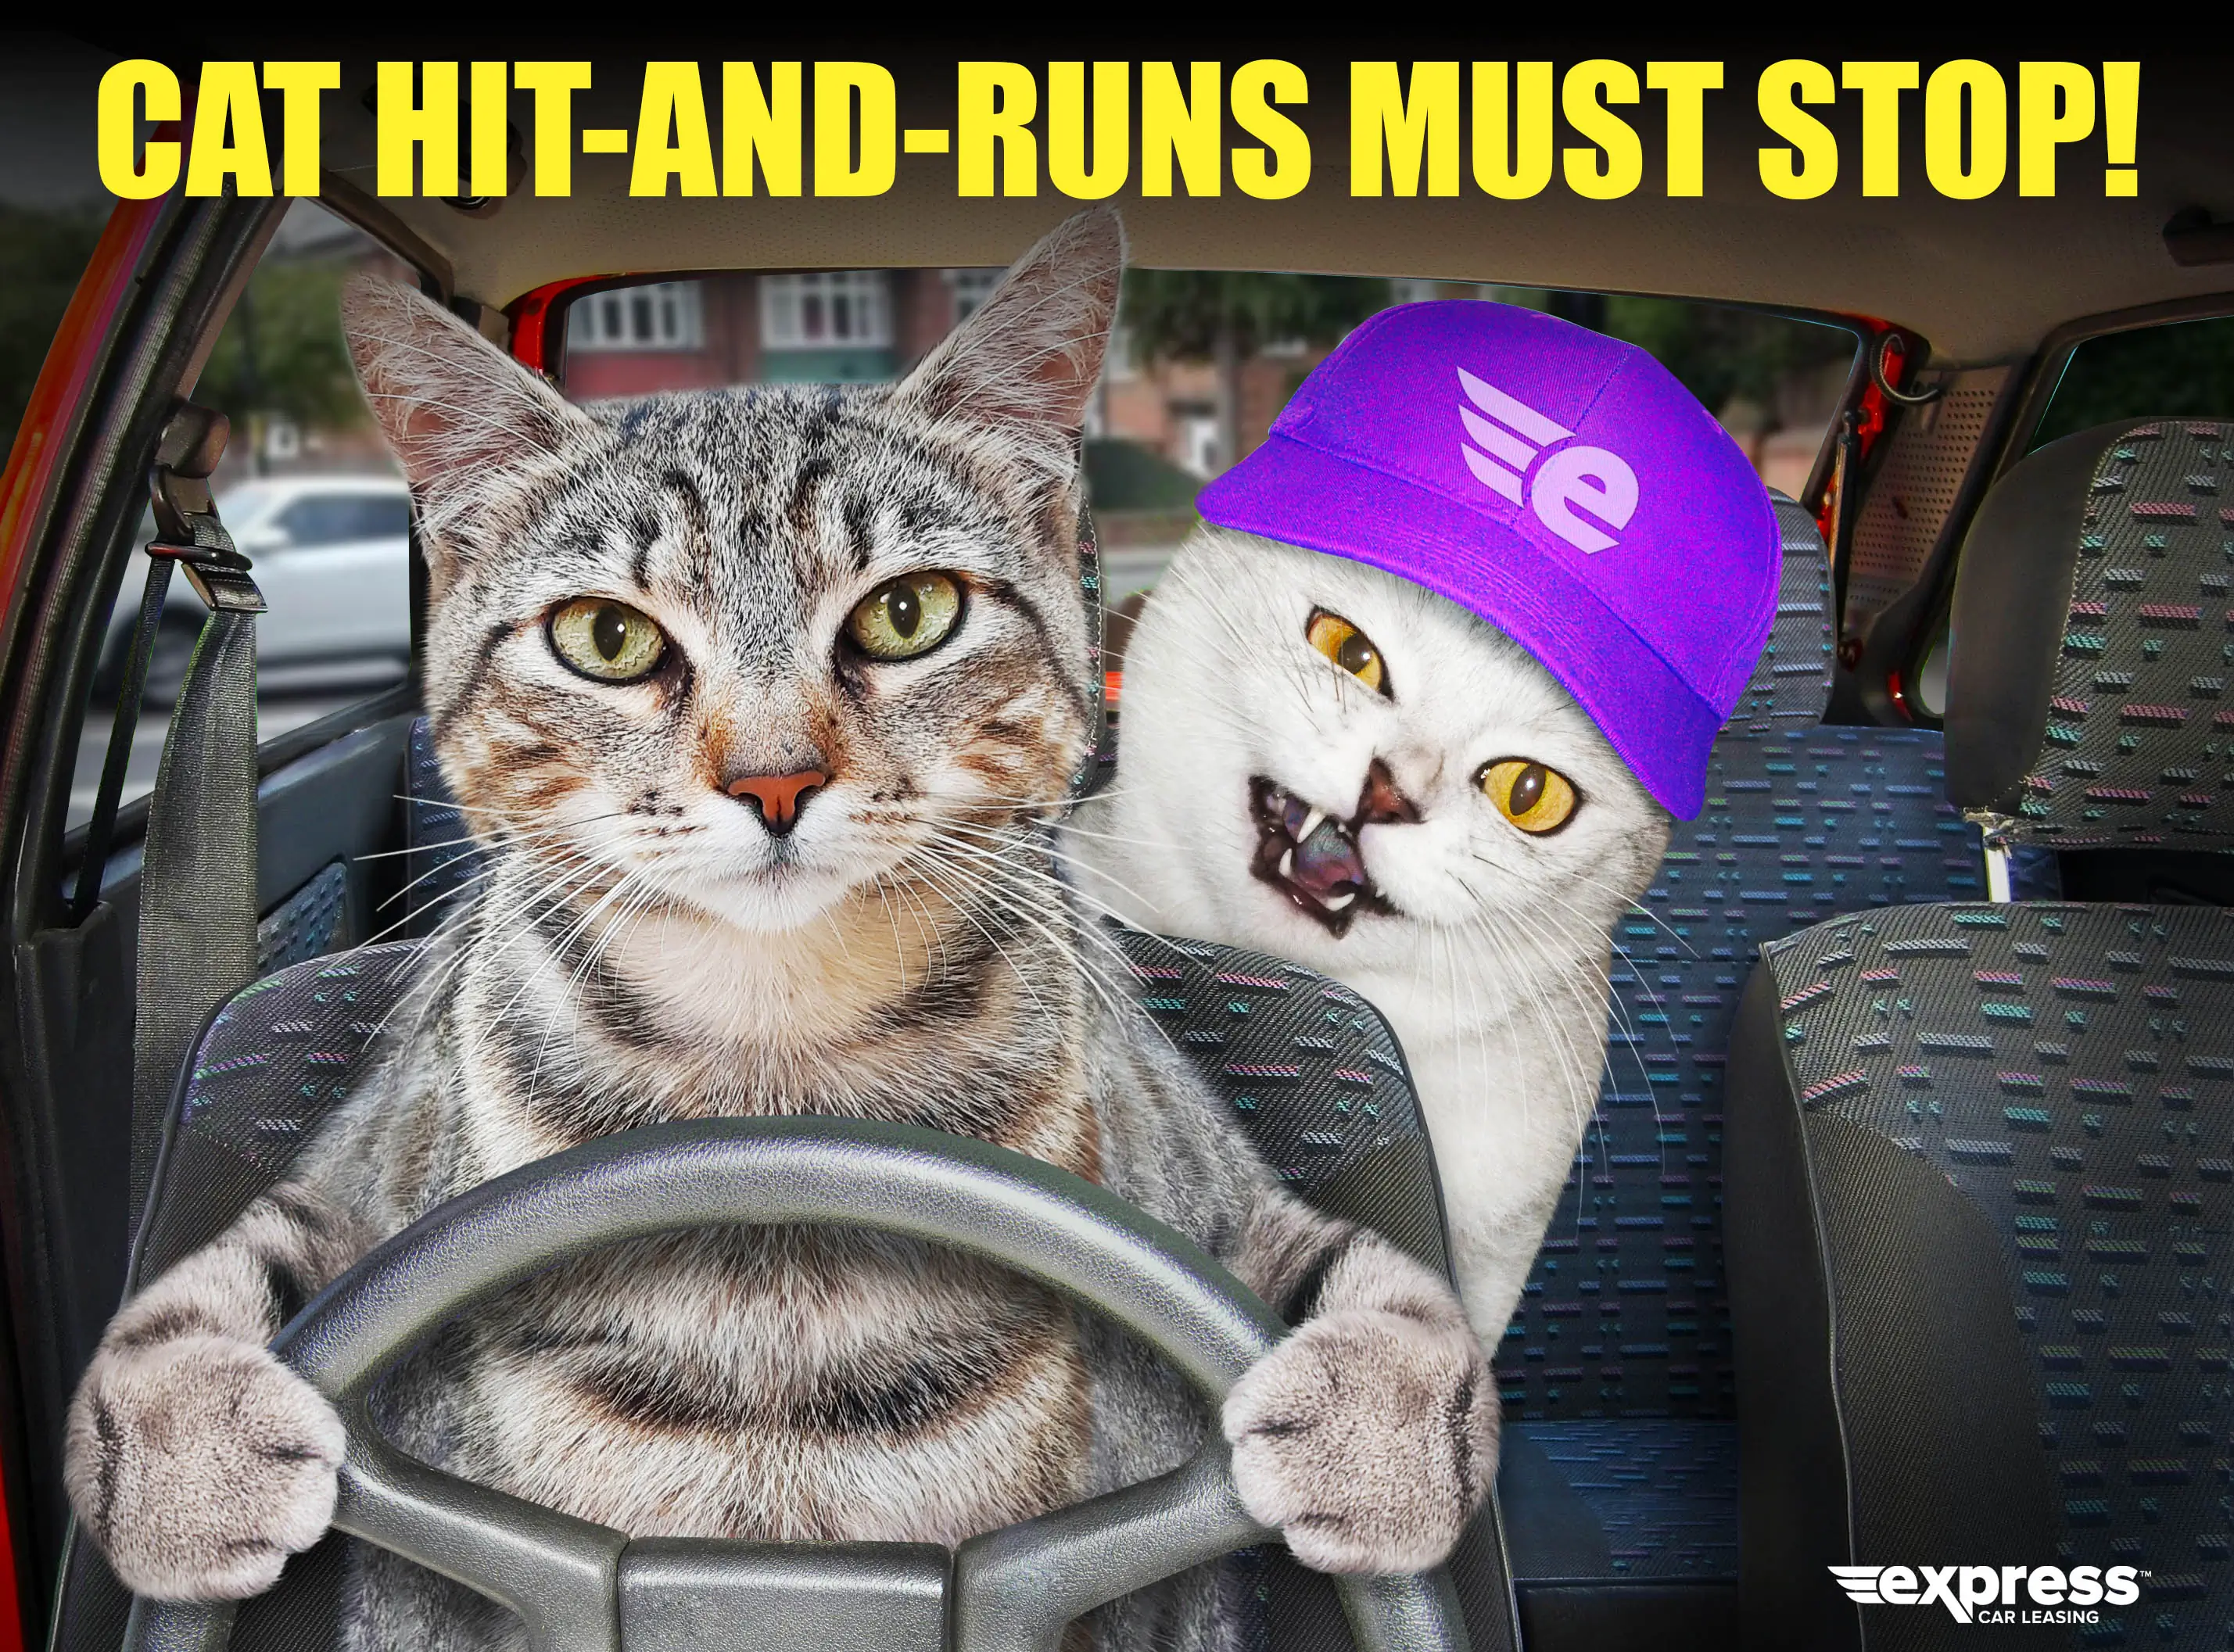 Cat hit-and-runs must stop, warns road safety charity